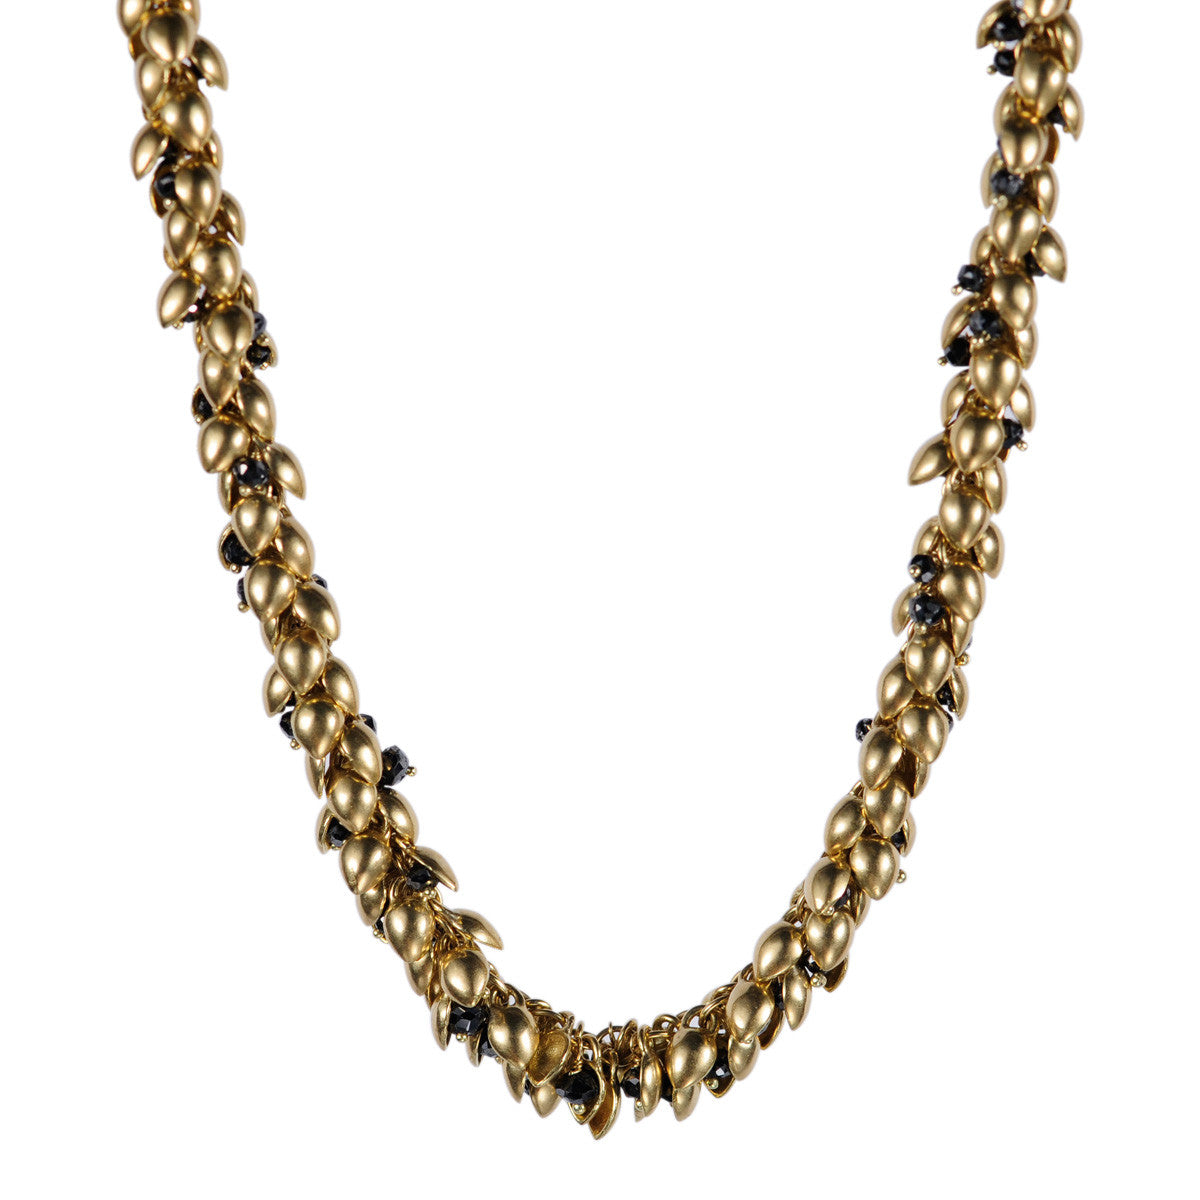 18K Gold All Bead Pod Necklace with Black Diamond Beads